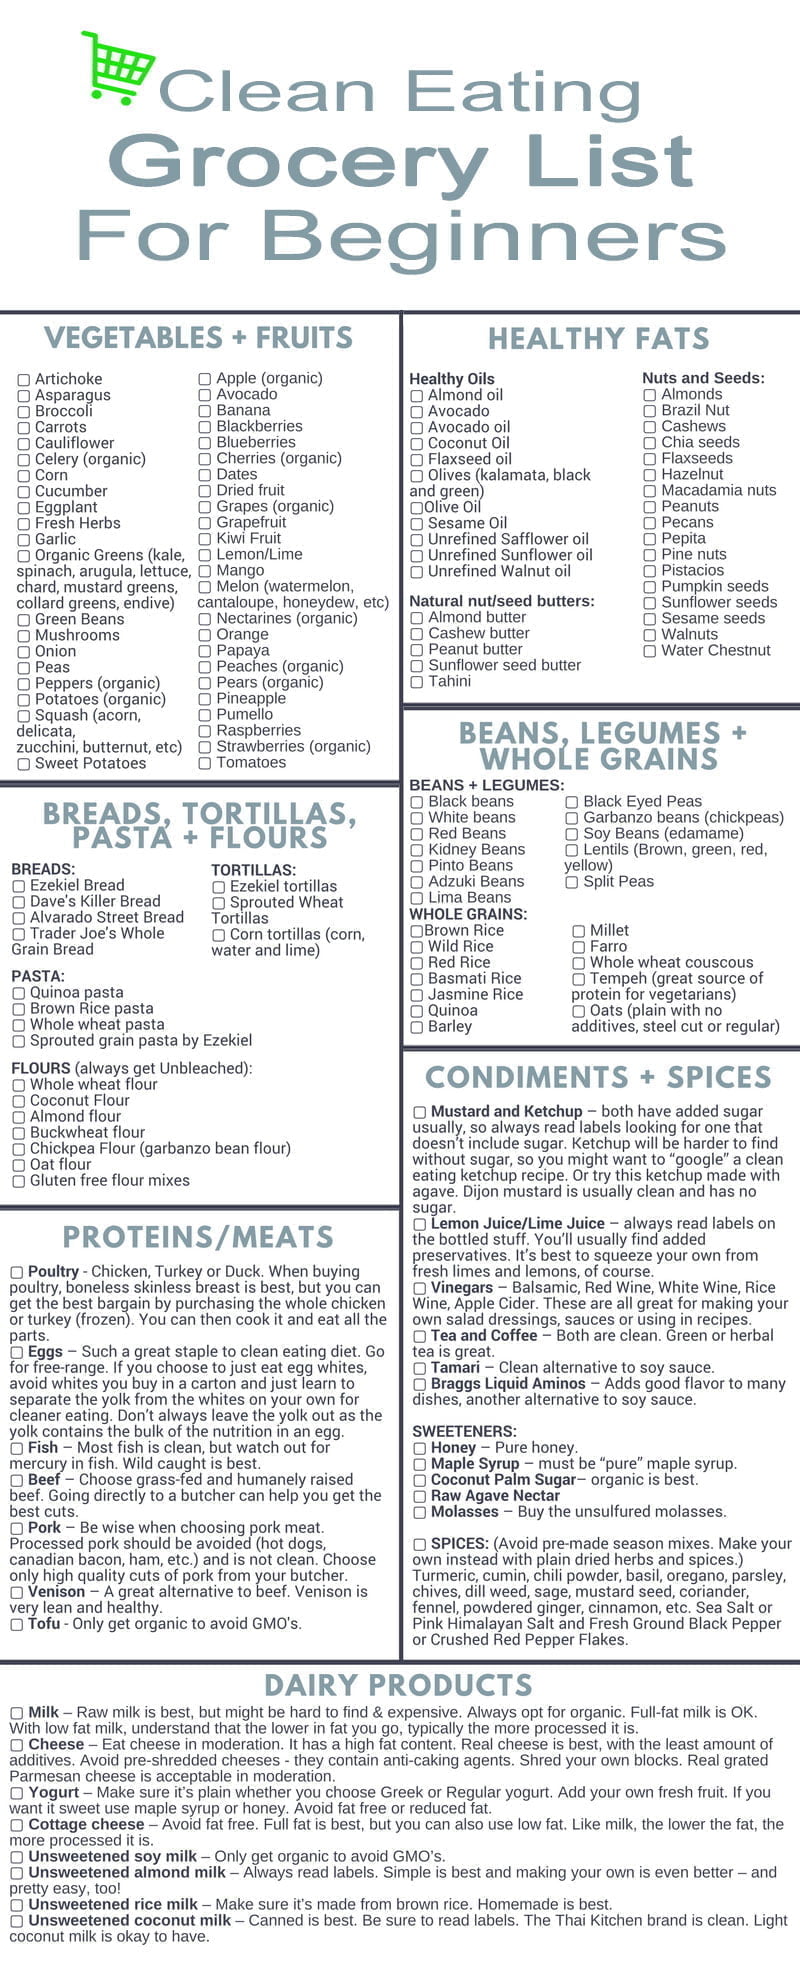 Clean-eating-grocery-list-products-women-should-buy-to-be-healthy